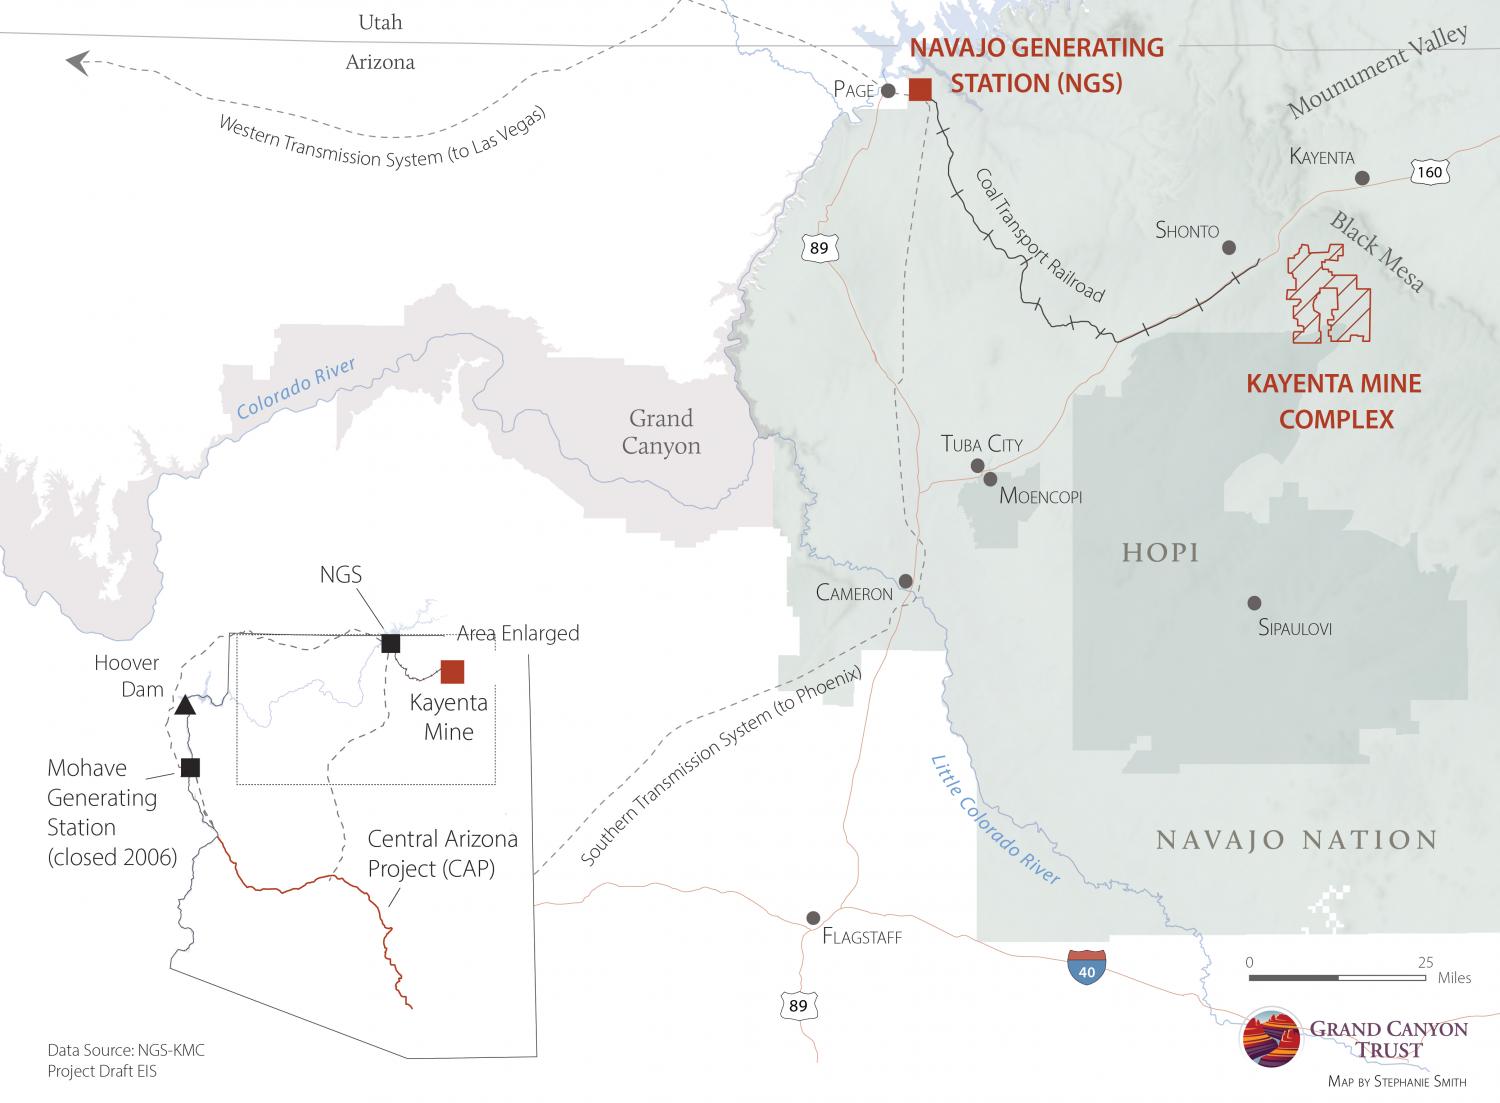 Map of NGS, Kayenta Mine Complex, and Central Arizona Project